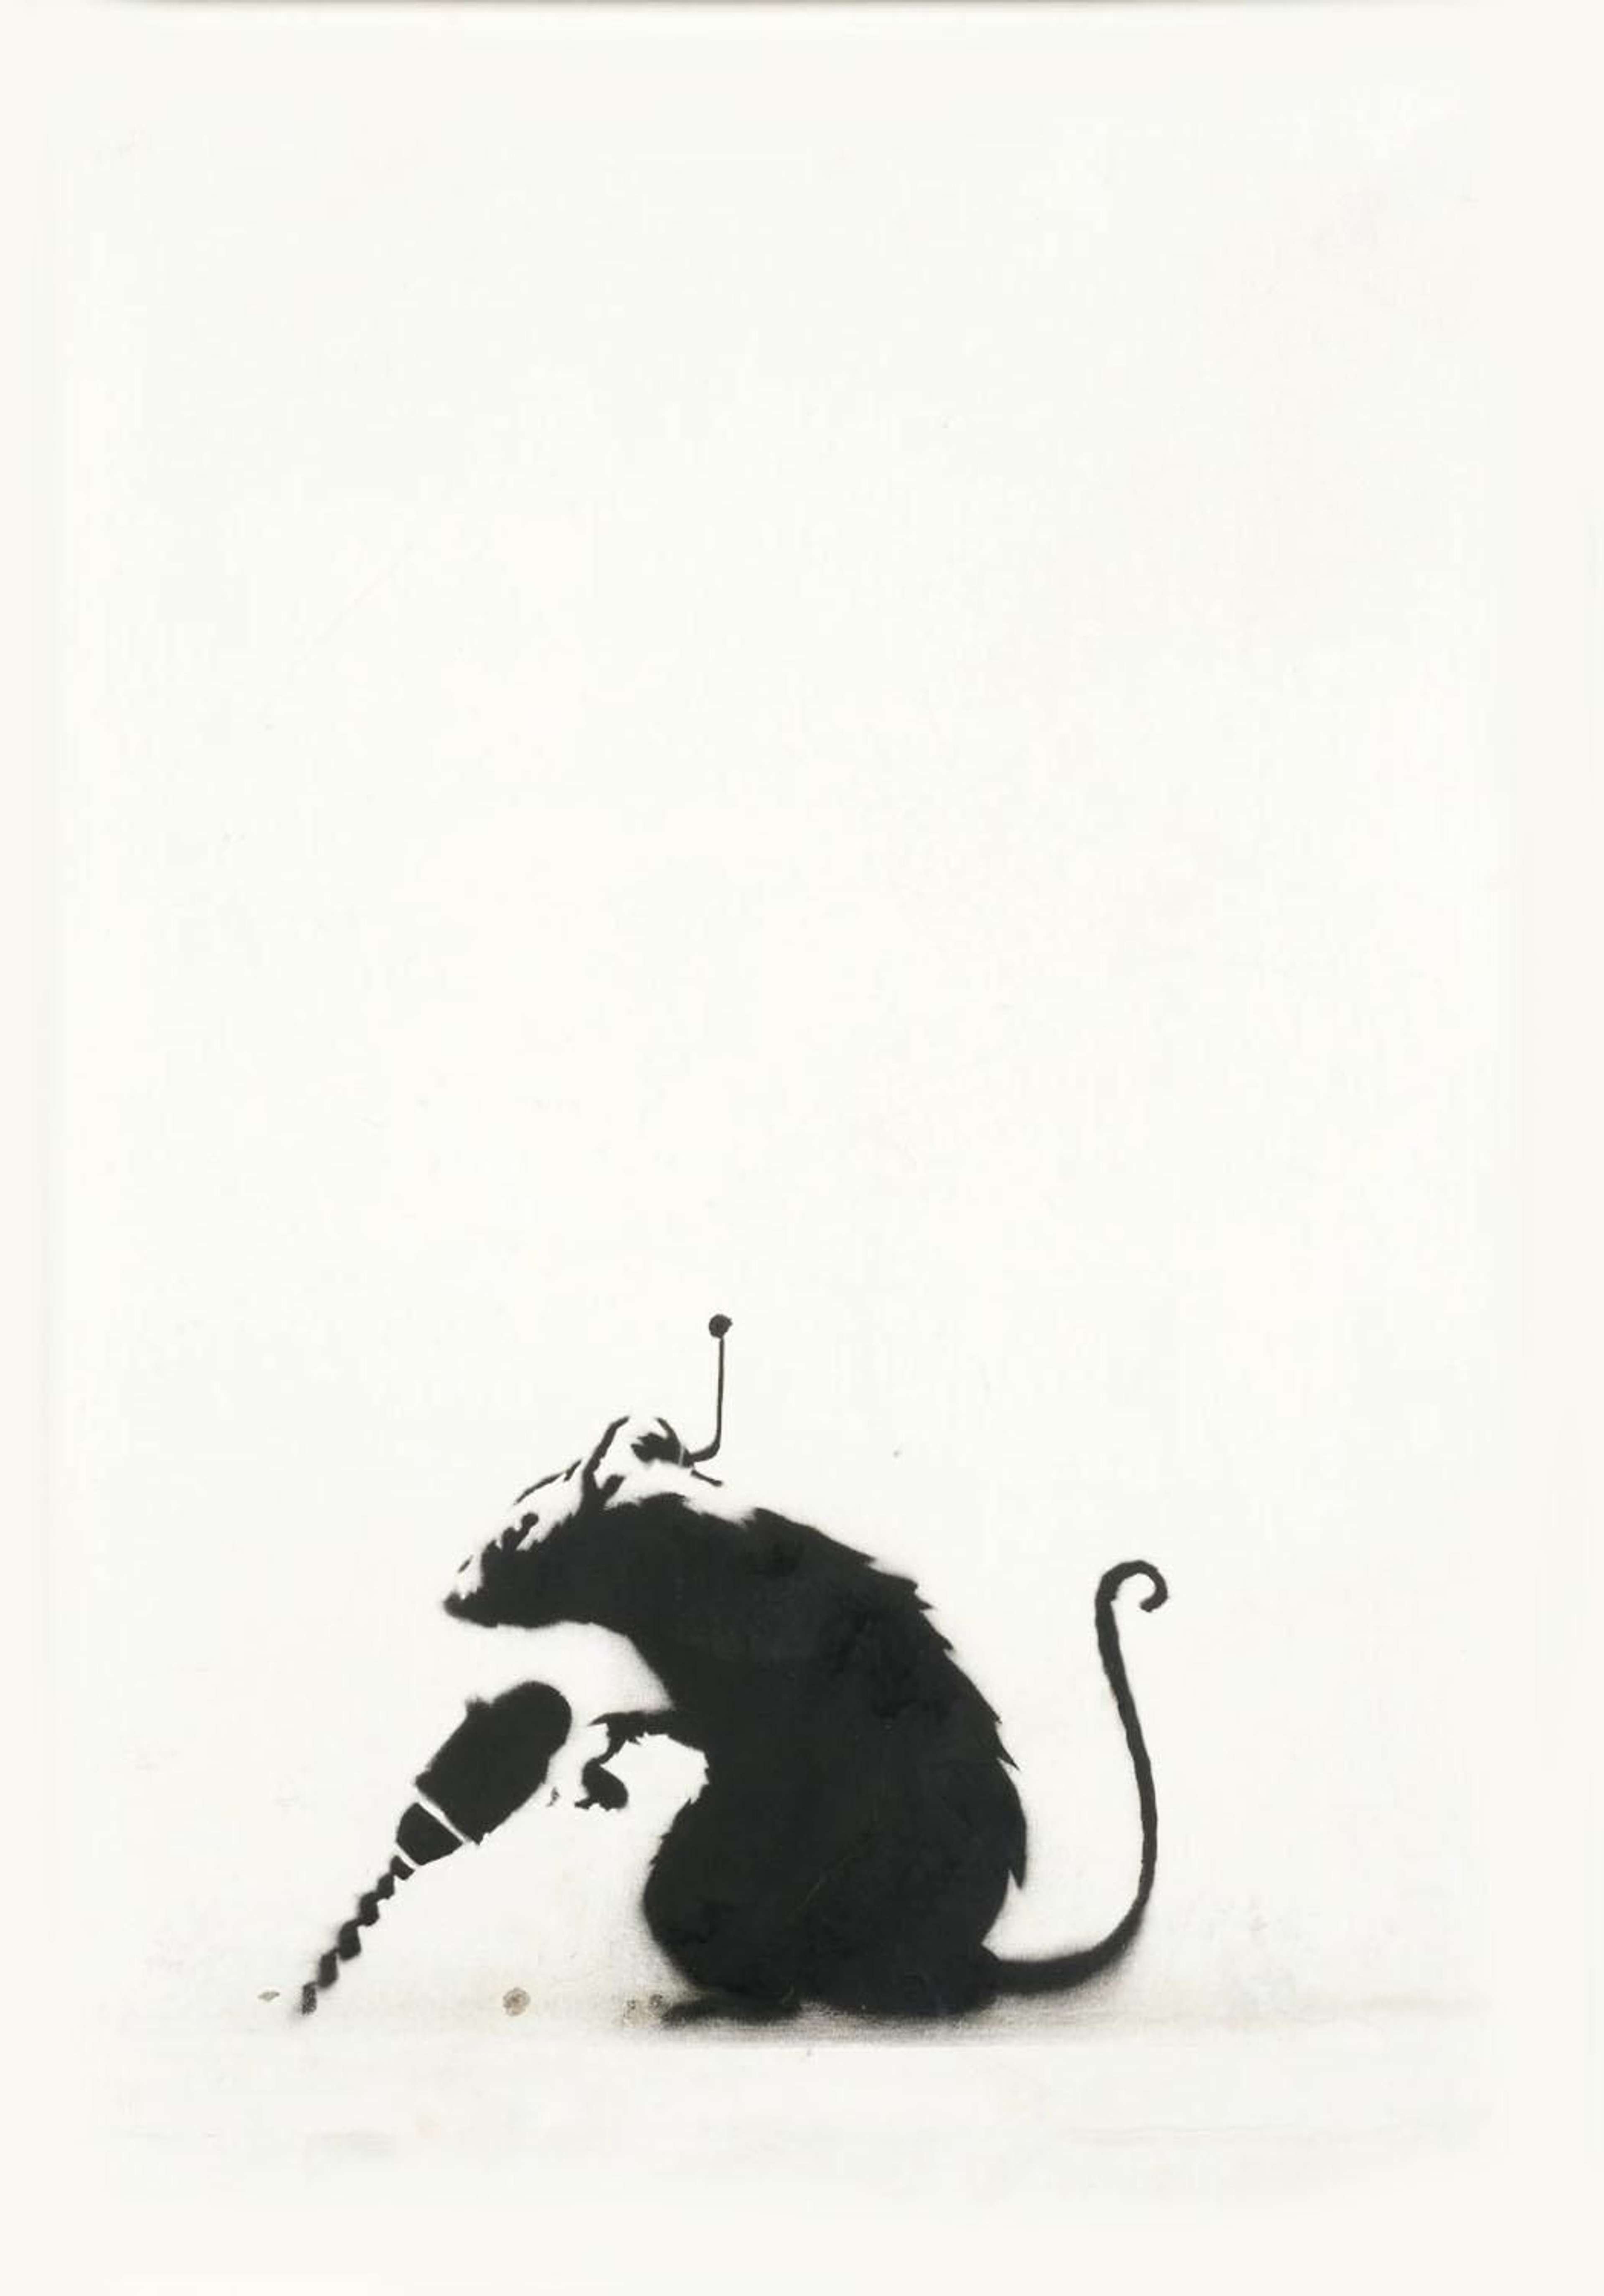 Banksy's Drill Rat. A spray paint work of a black rat with an electric drill.